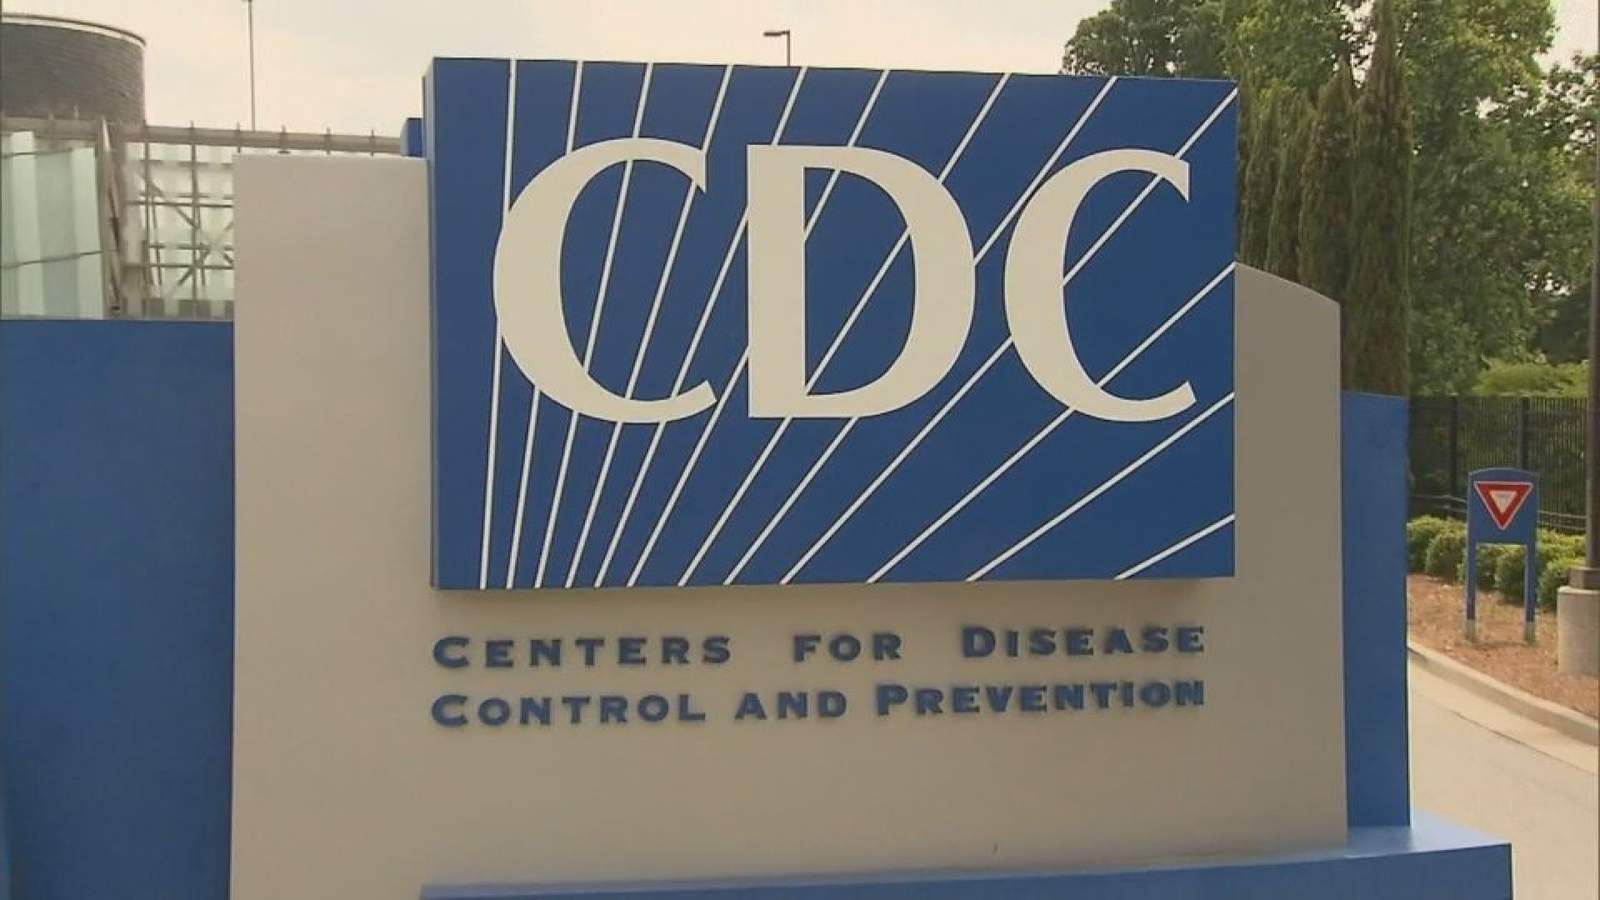 CDC: From January to October, US had 299K more deaths than in previous years